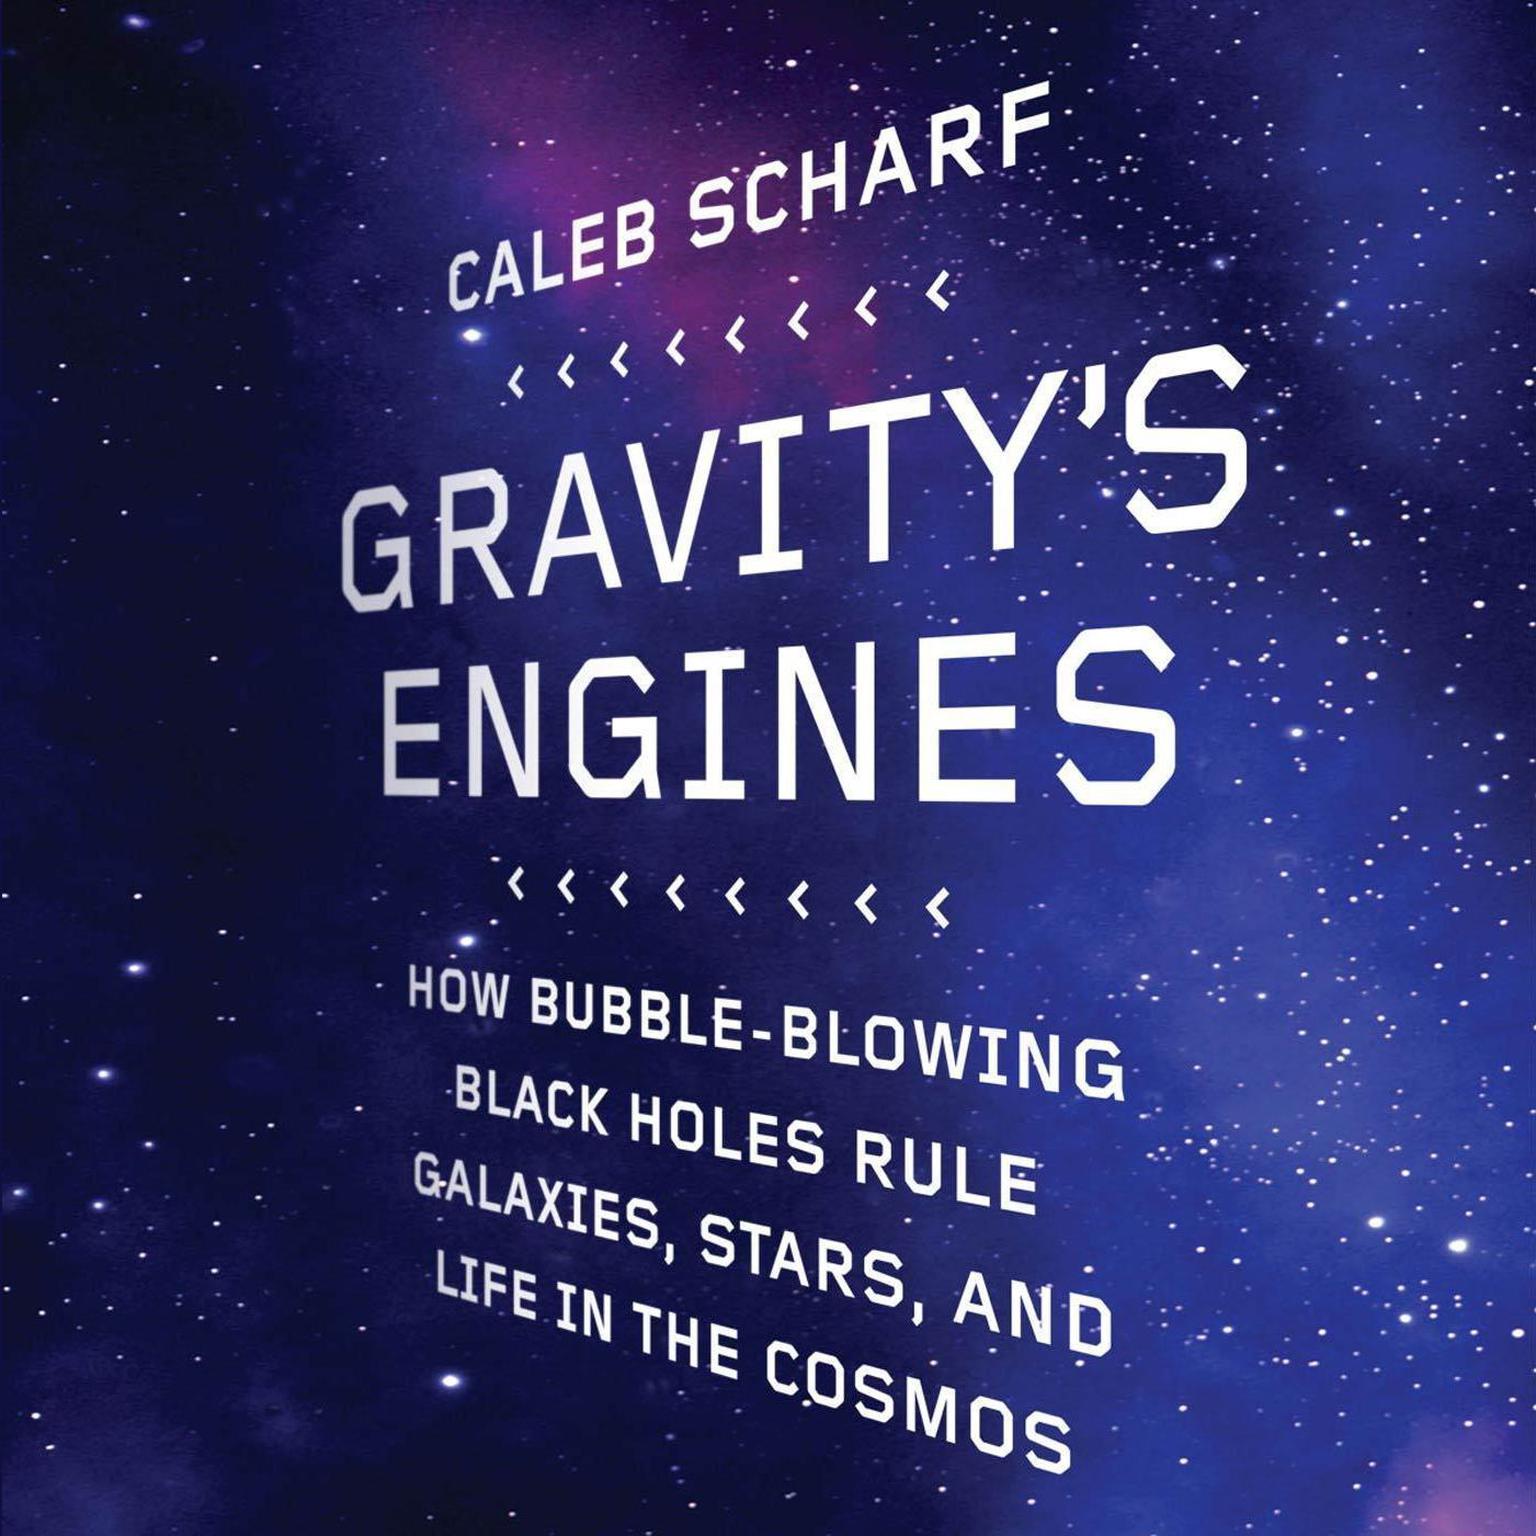 Gravitys Engines: How Bubble-Blowing Black Holes Rule Galaxies, Stars, and Life in the Cosmos Audiobook, by Caleb Scharf